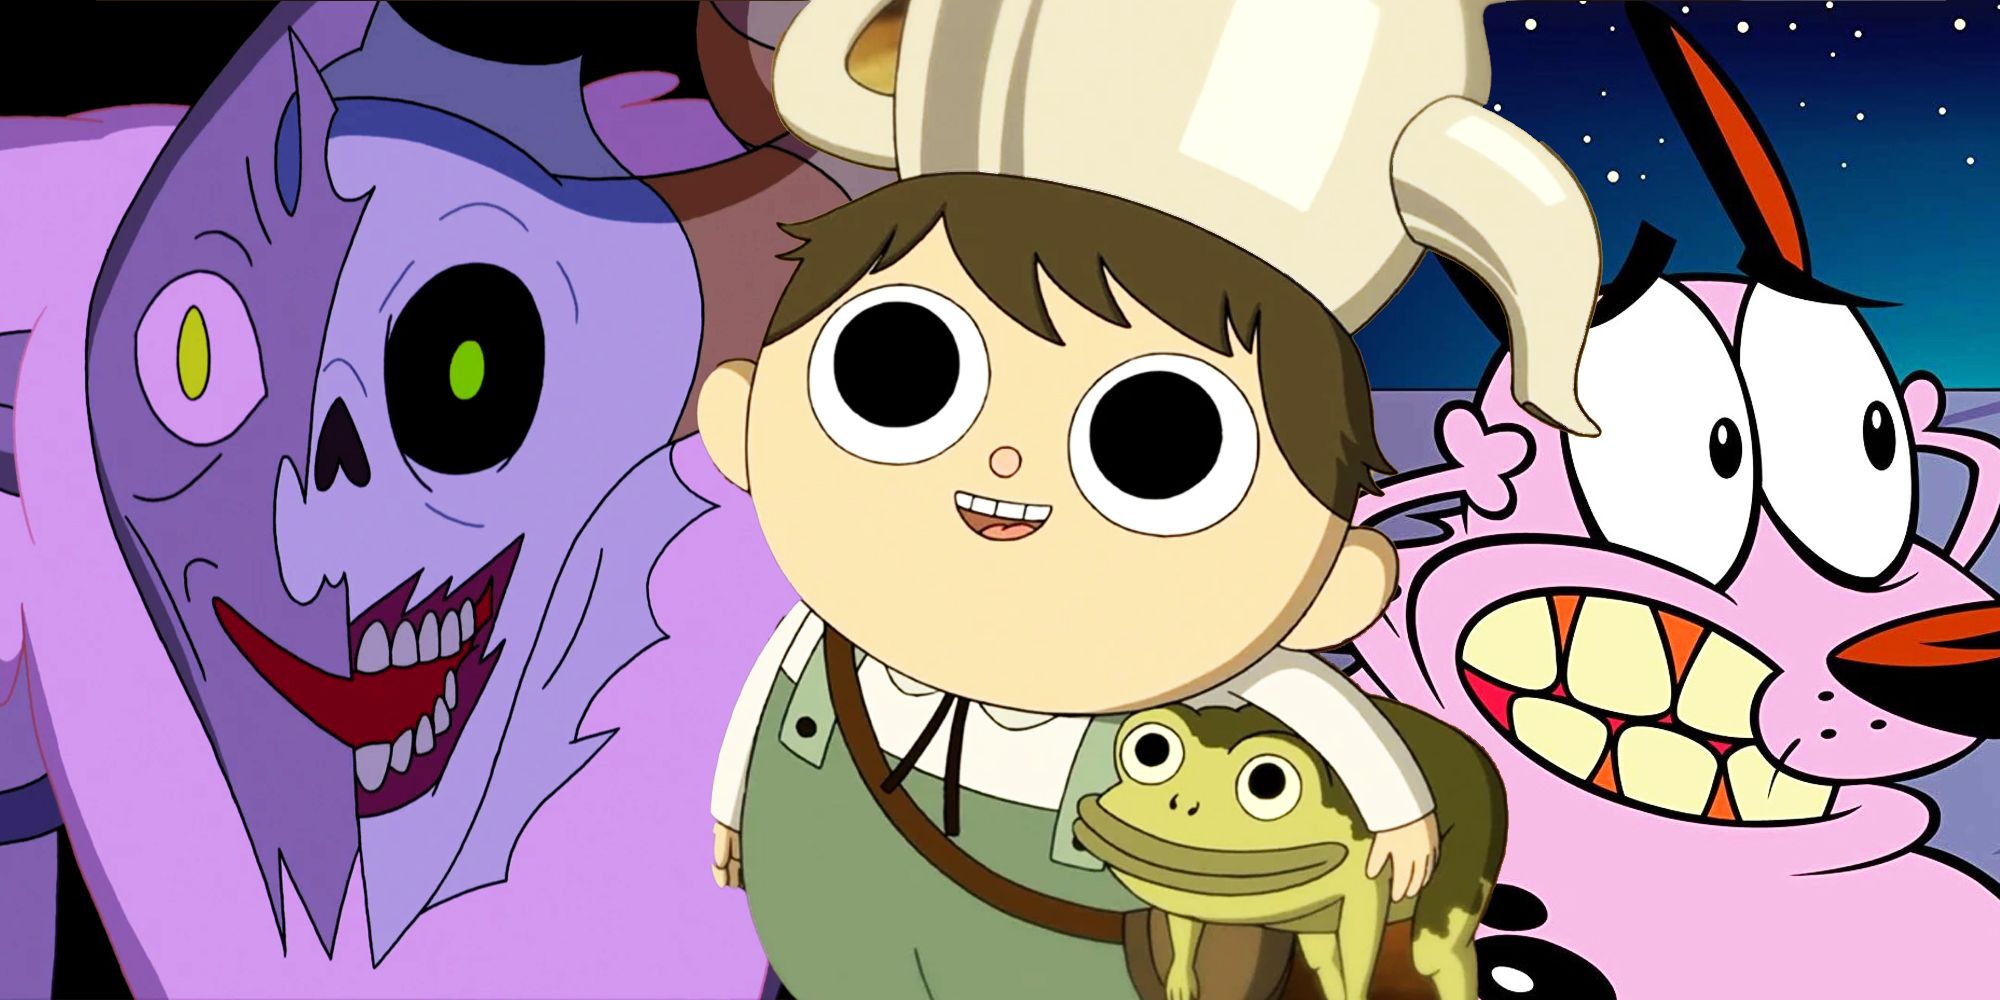 Over the Garden Wall, Adventure Time, and Courage the Cowardly Dog